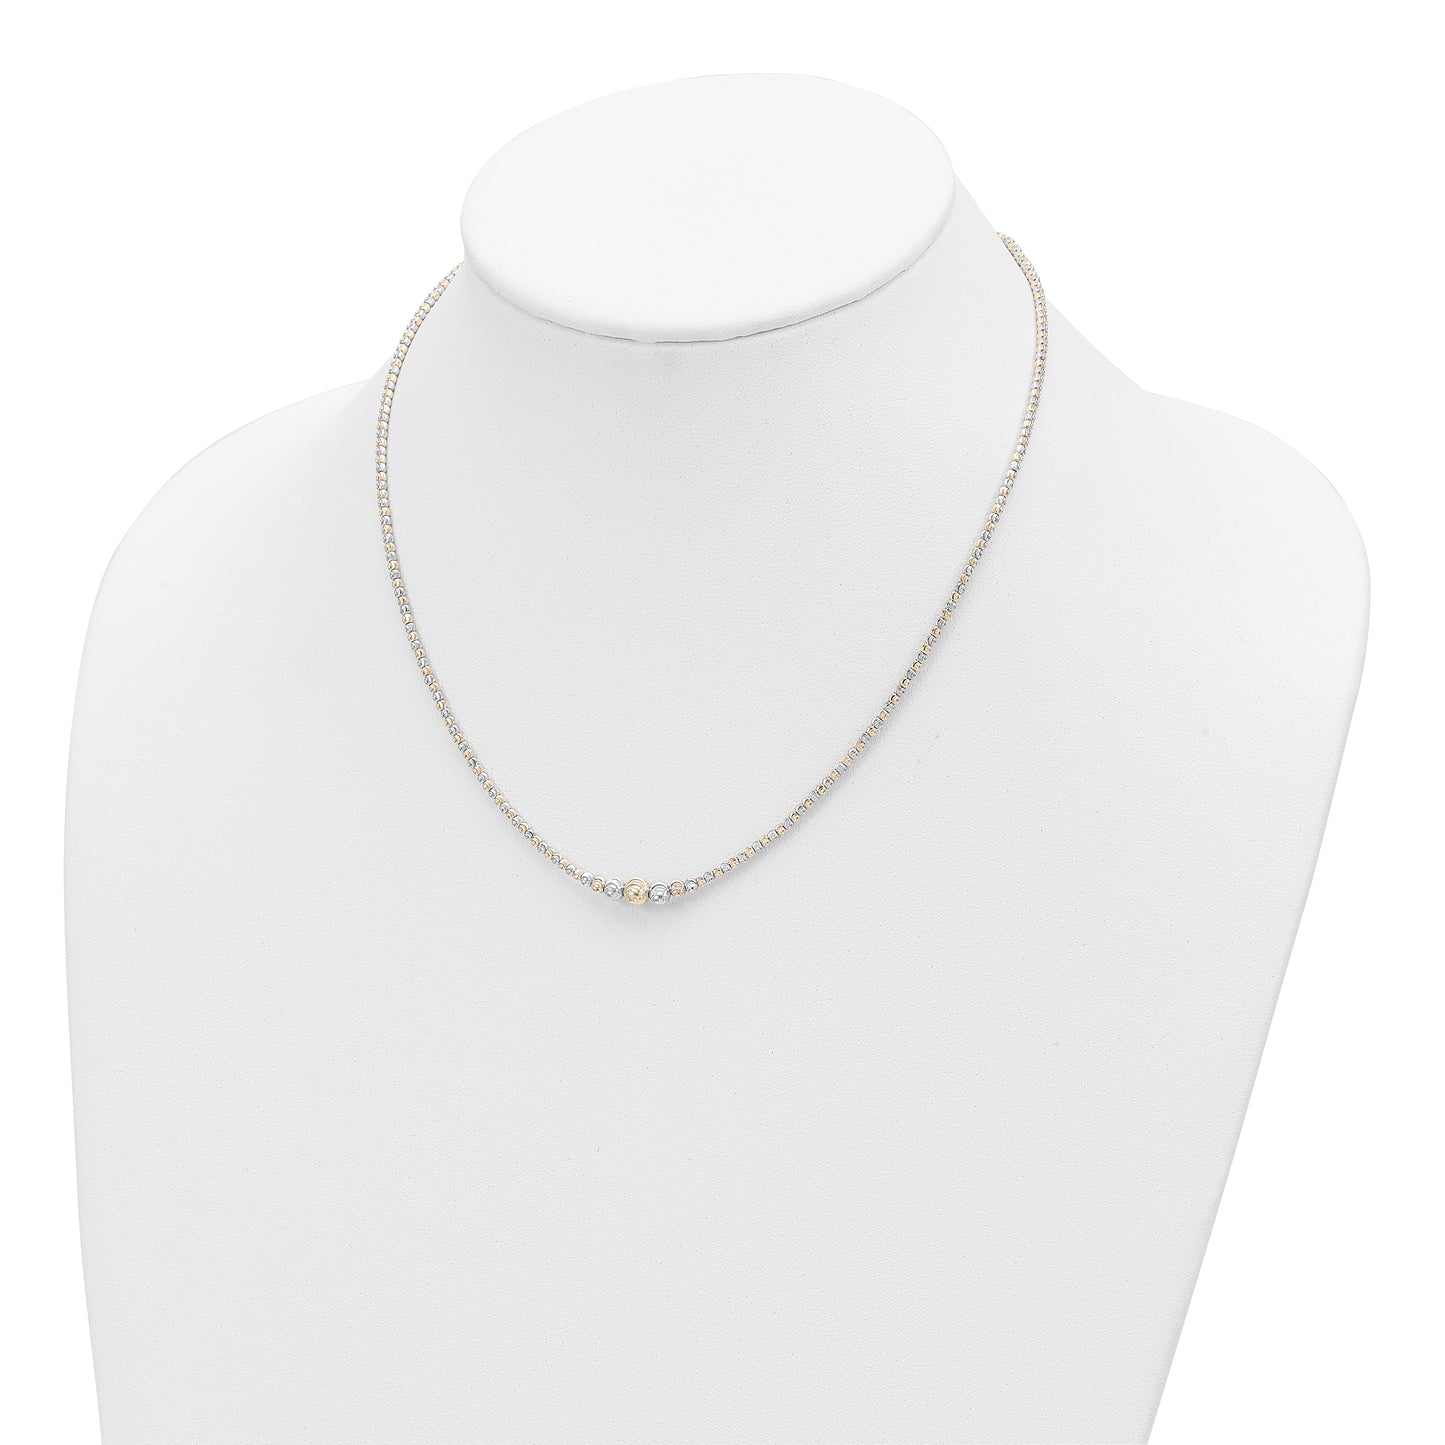 14K Two-tone Polished D/C Beaded 17in Necklace